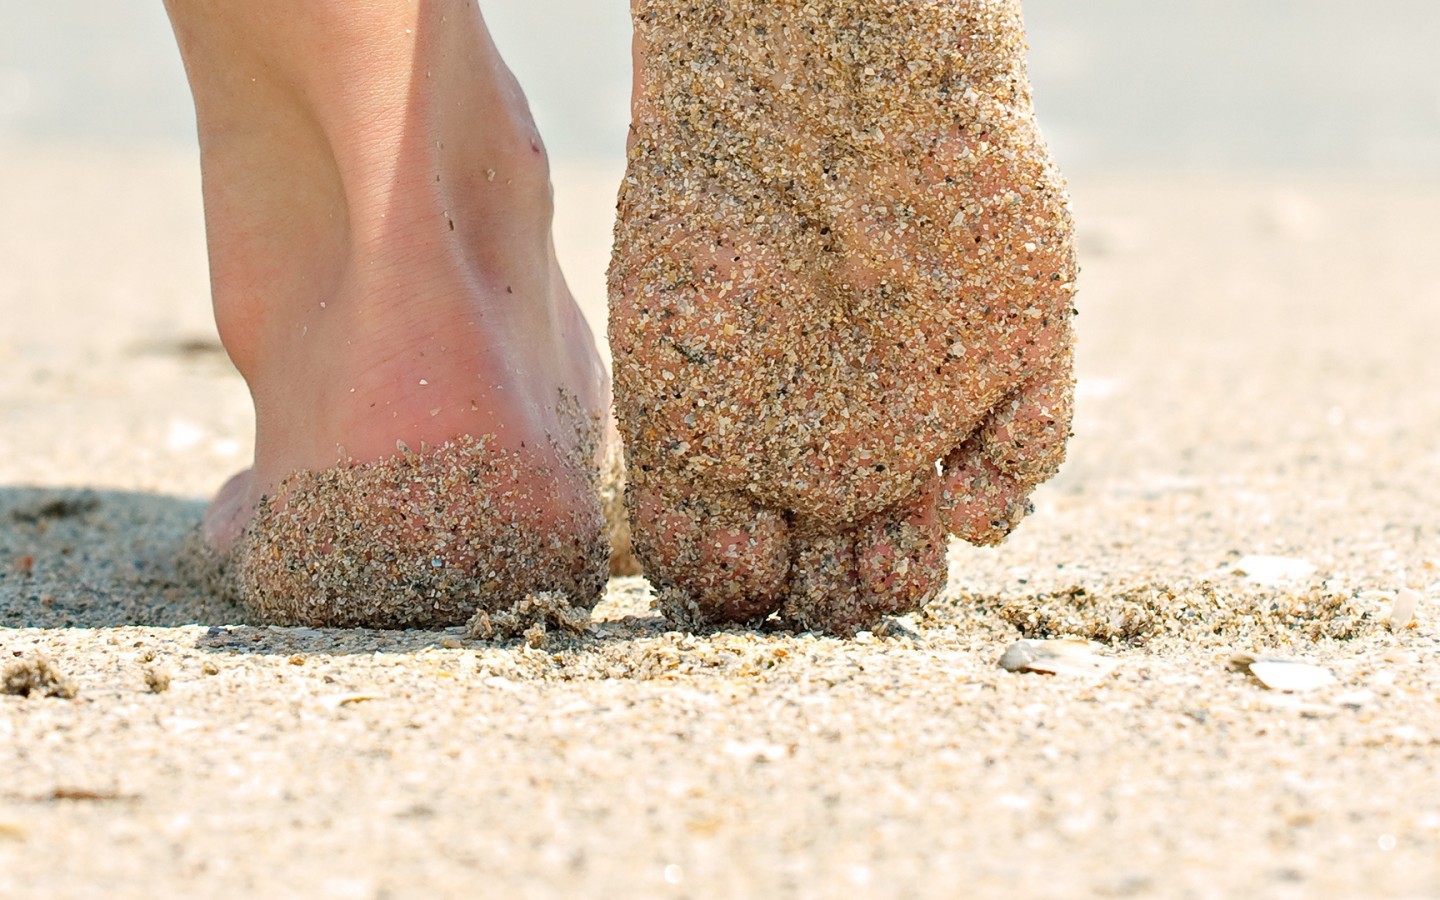 Sand Feet Barefoot Worms Eye View Closeup Sand Covered 1440x900